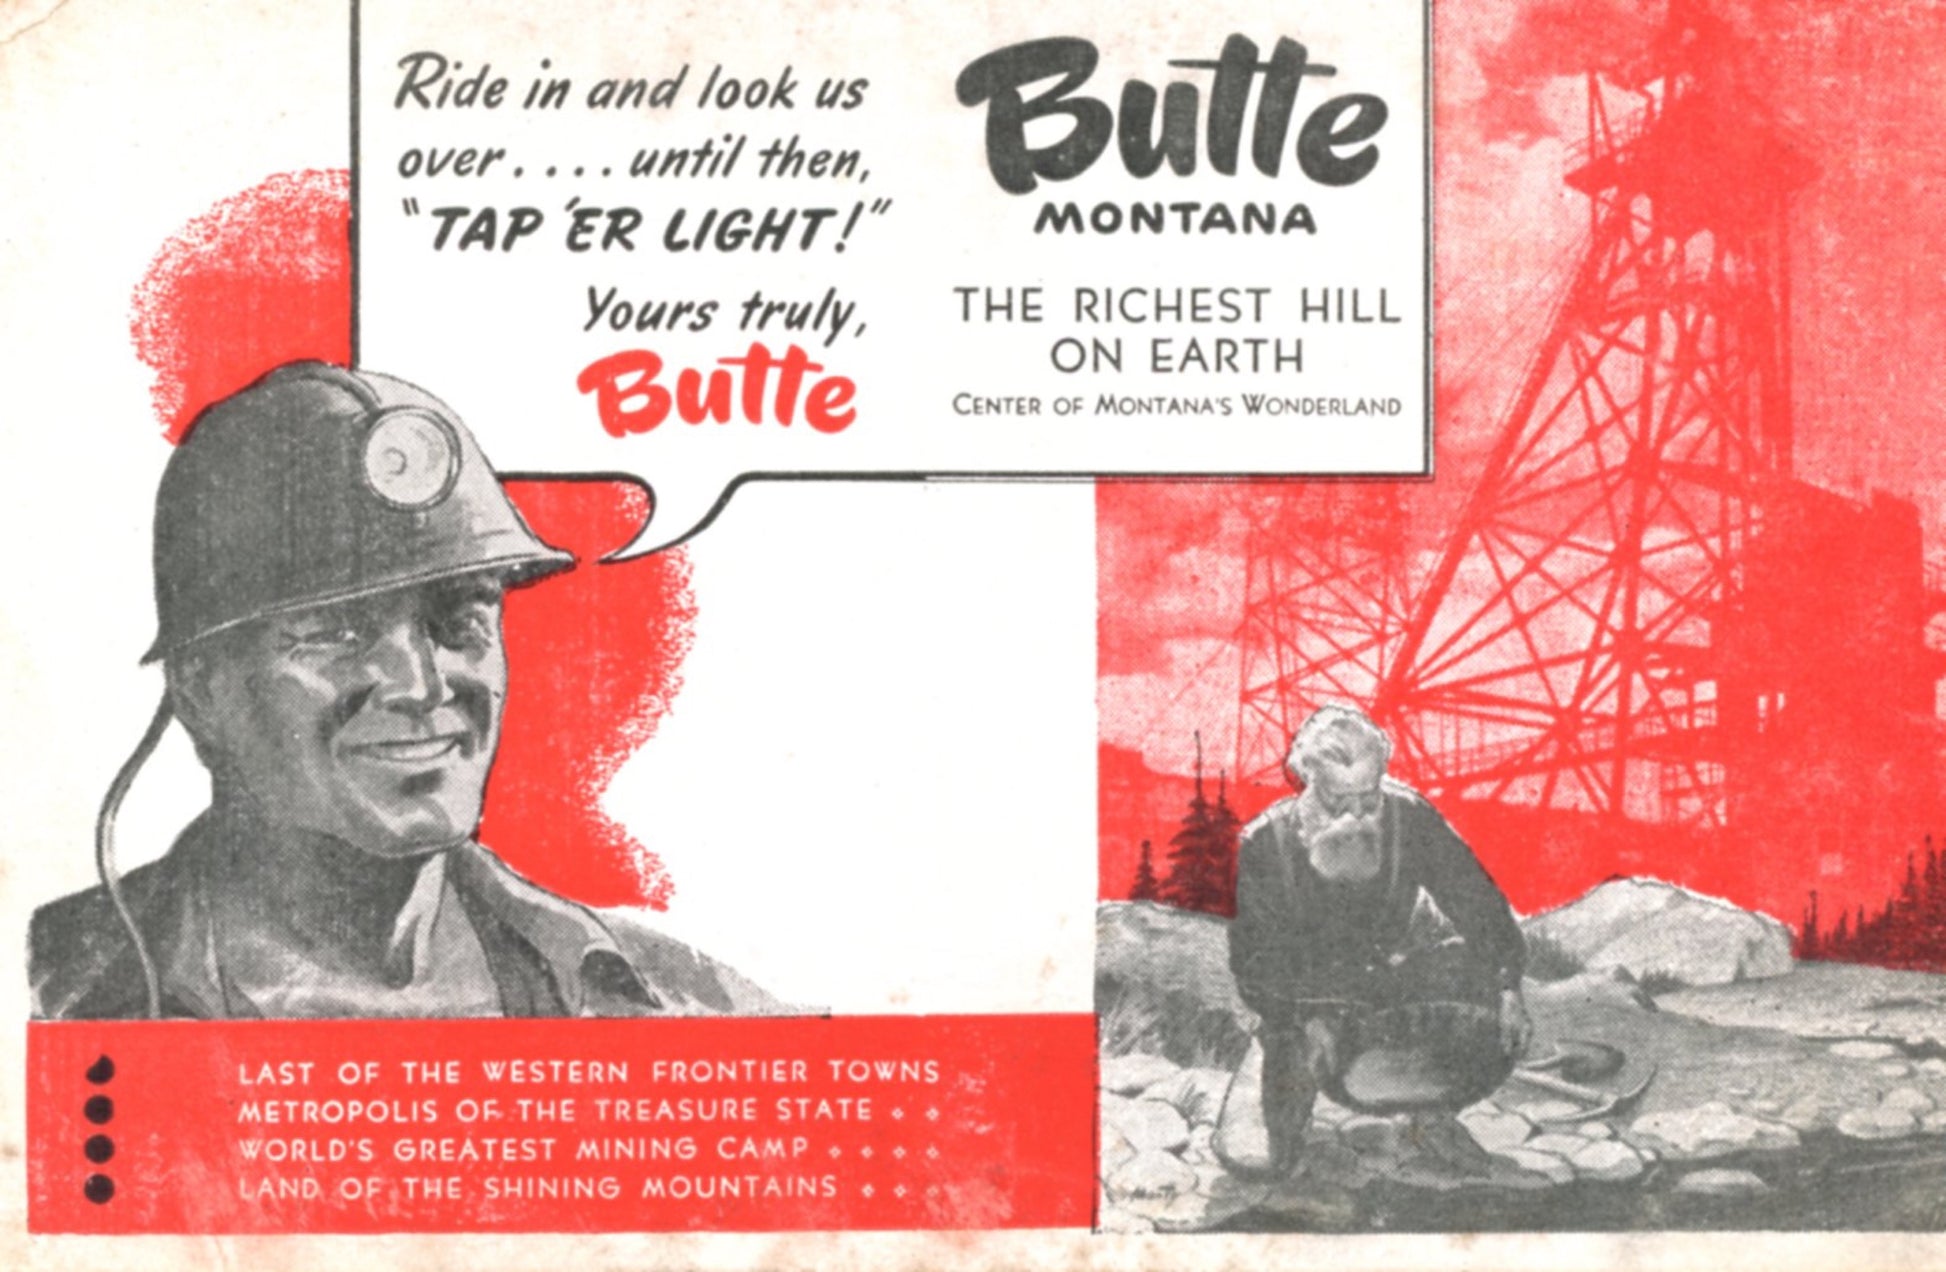 Richest Hill on Earth BUTTE MONTANA Vintage Historical Postcard ©1940's